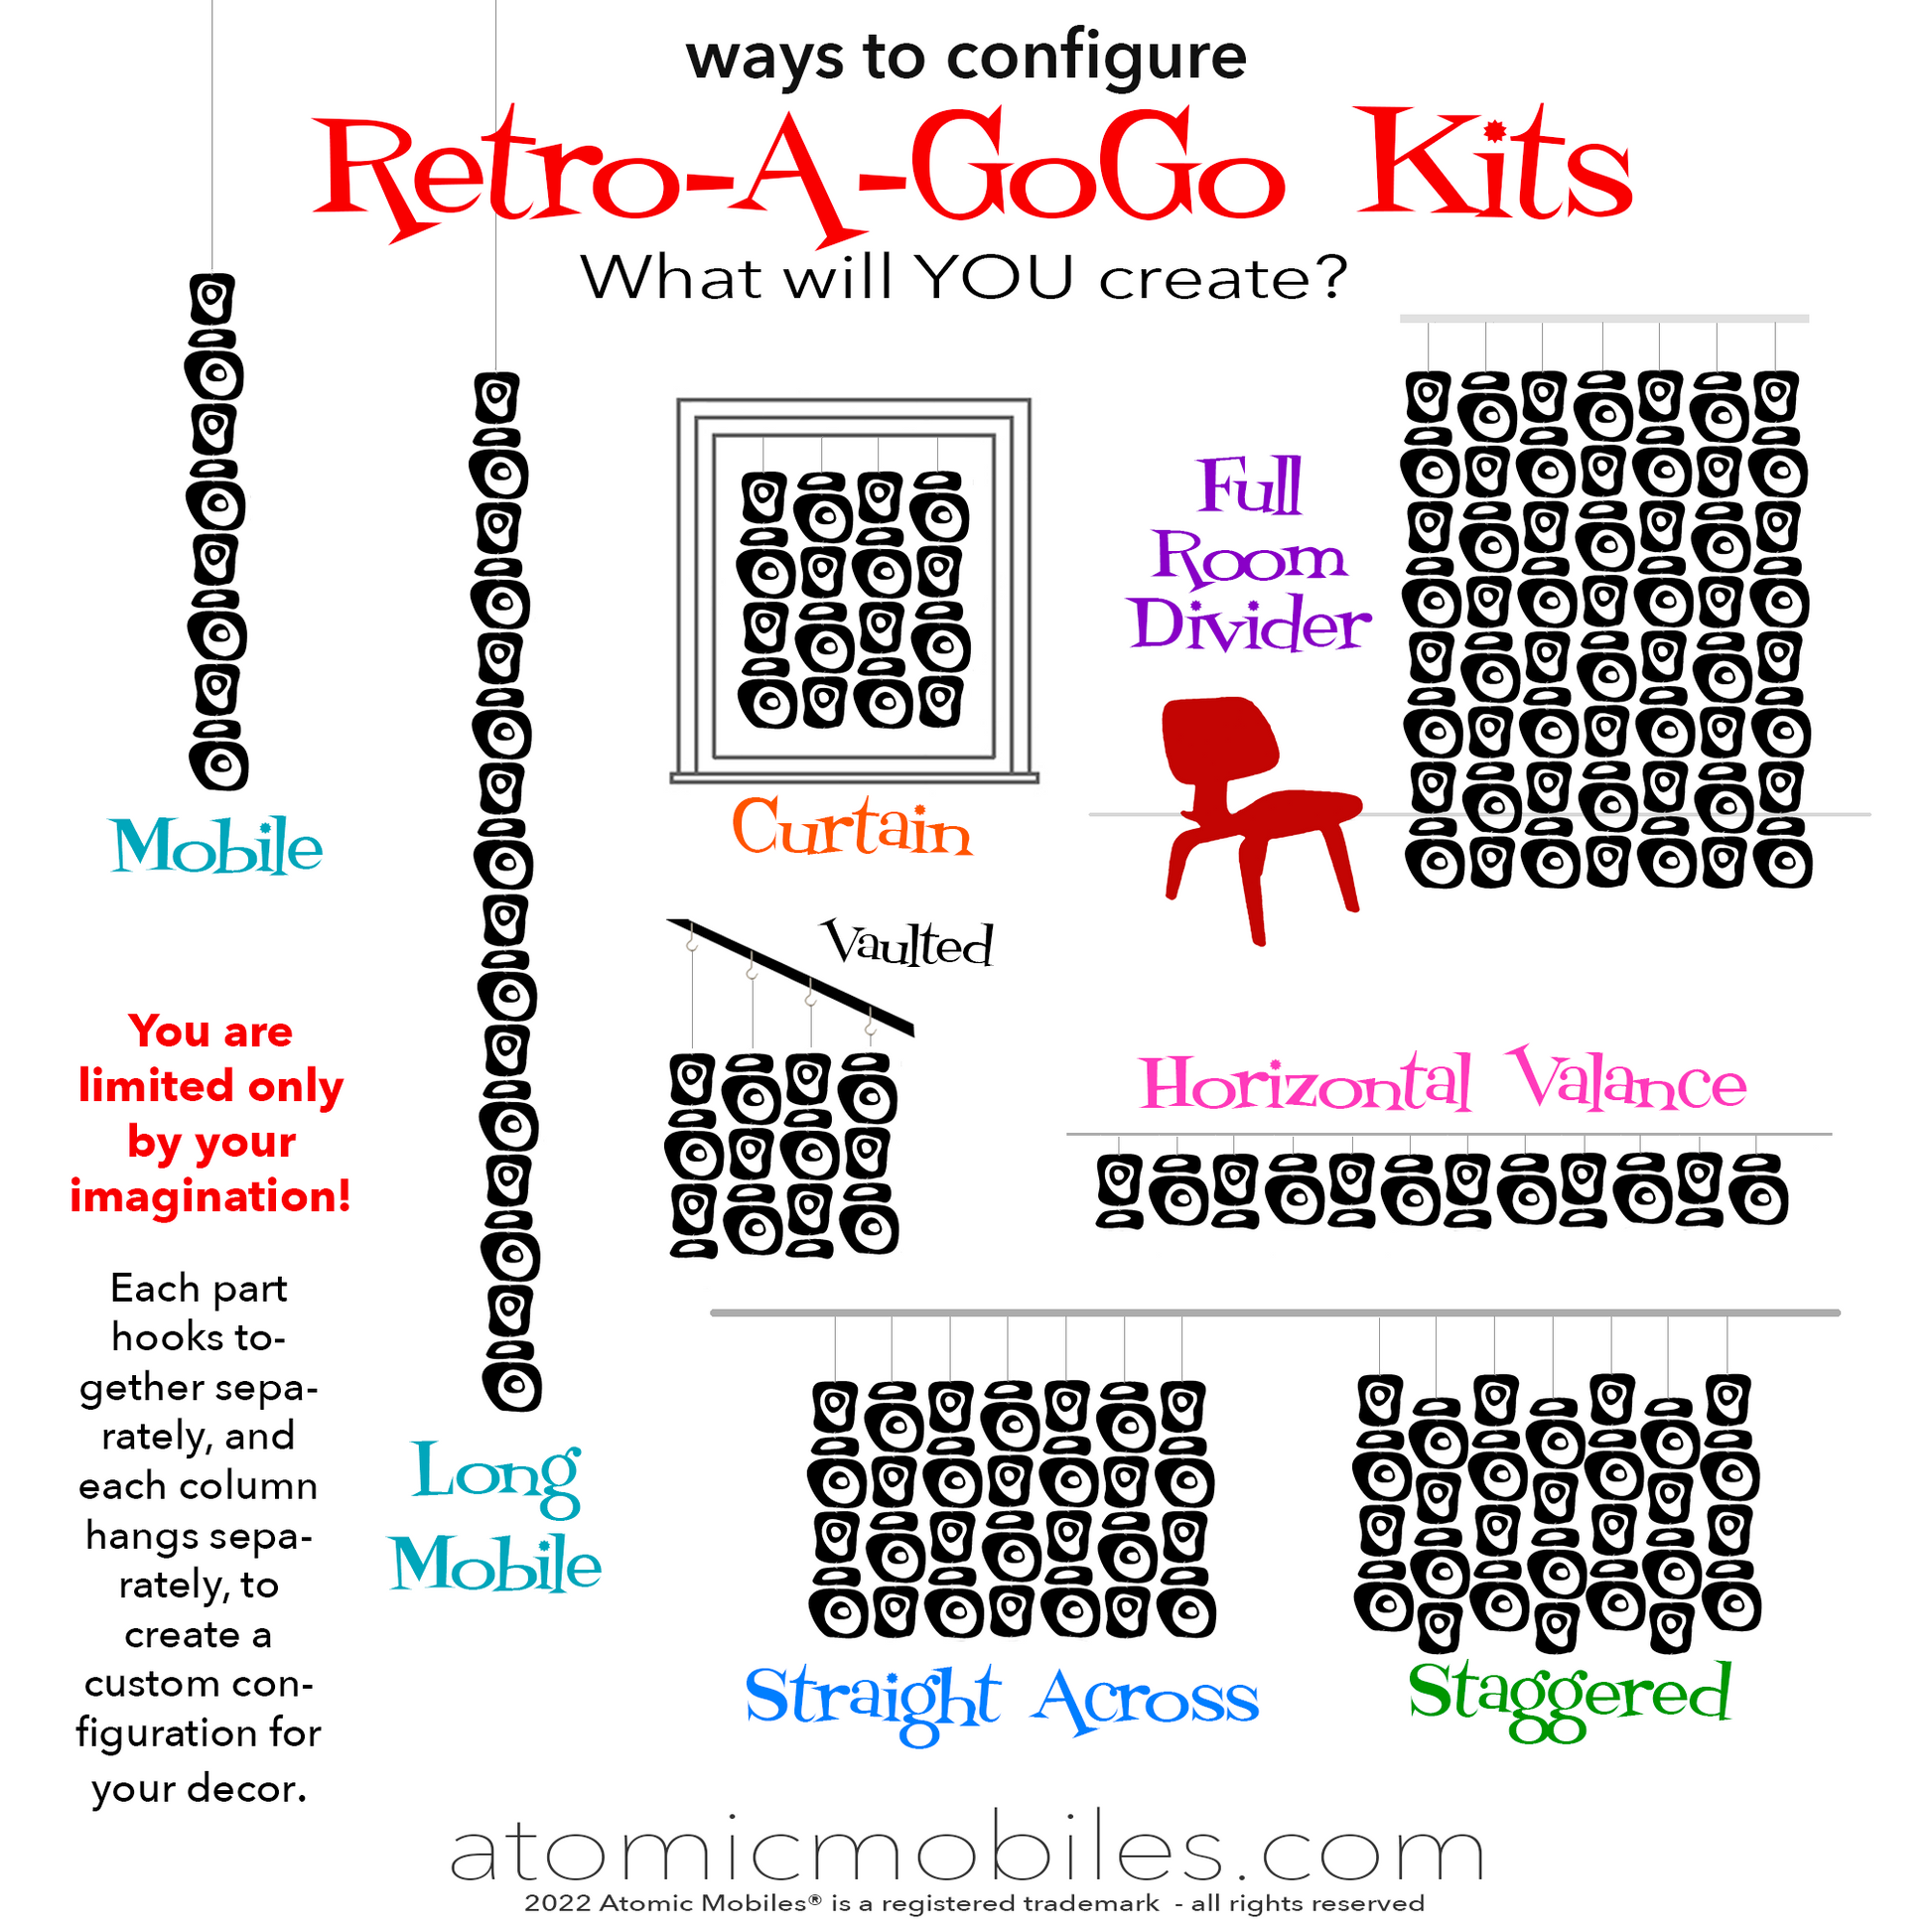 Retro-A-GoGo Atomic Kits Inspo for Mobiles, Room Dividers, Curtains, Vaulted Ceilings, and Valances by AtomicMobiles.com